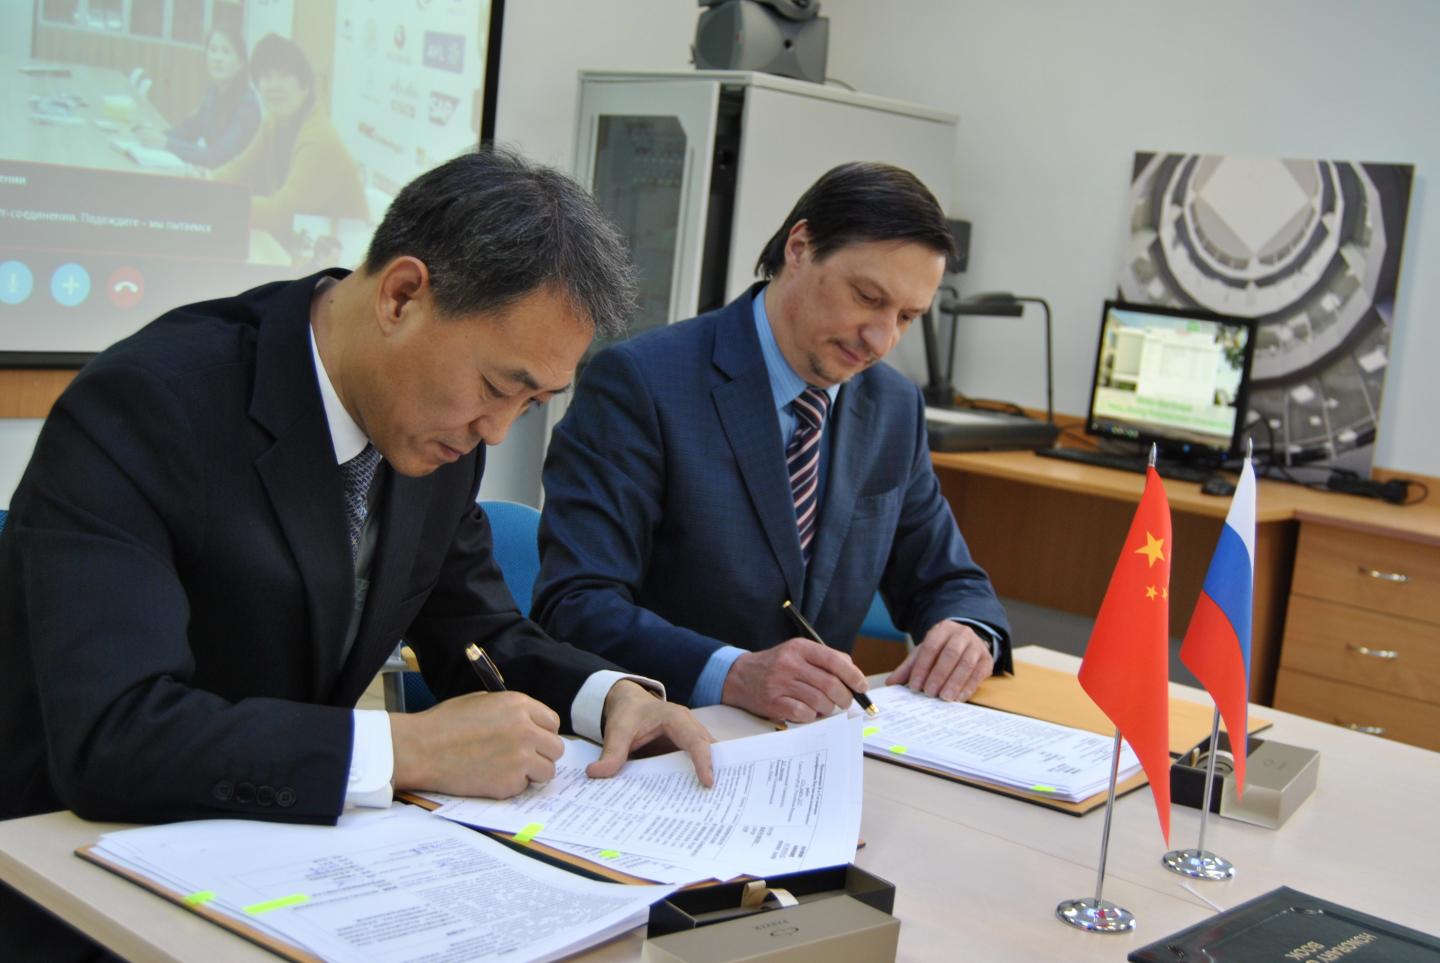 Signing of the Agreement on the Joint Project for Creation of New Composite Materials